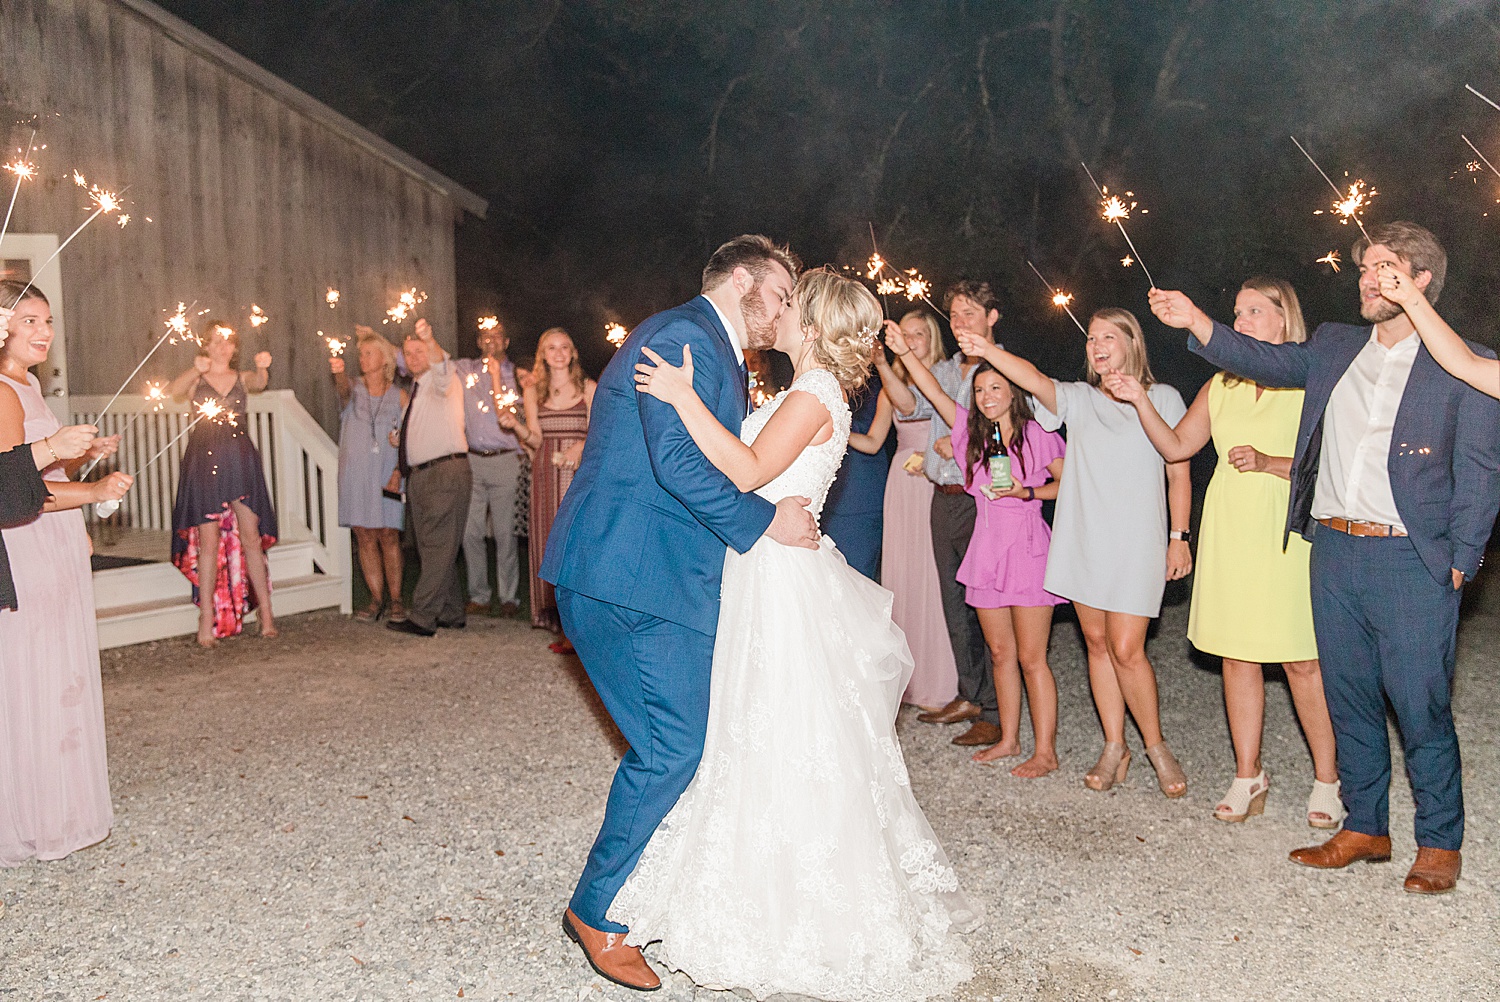 husband and wife kiss at the end of wedding night surrounded by their guests holding sparklers